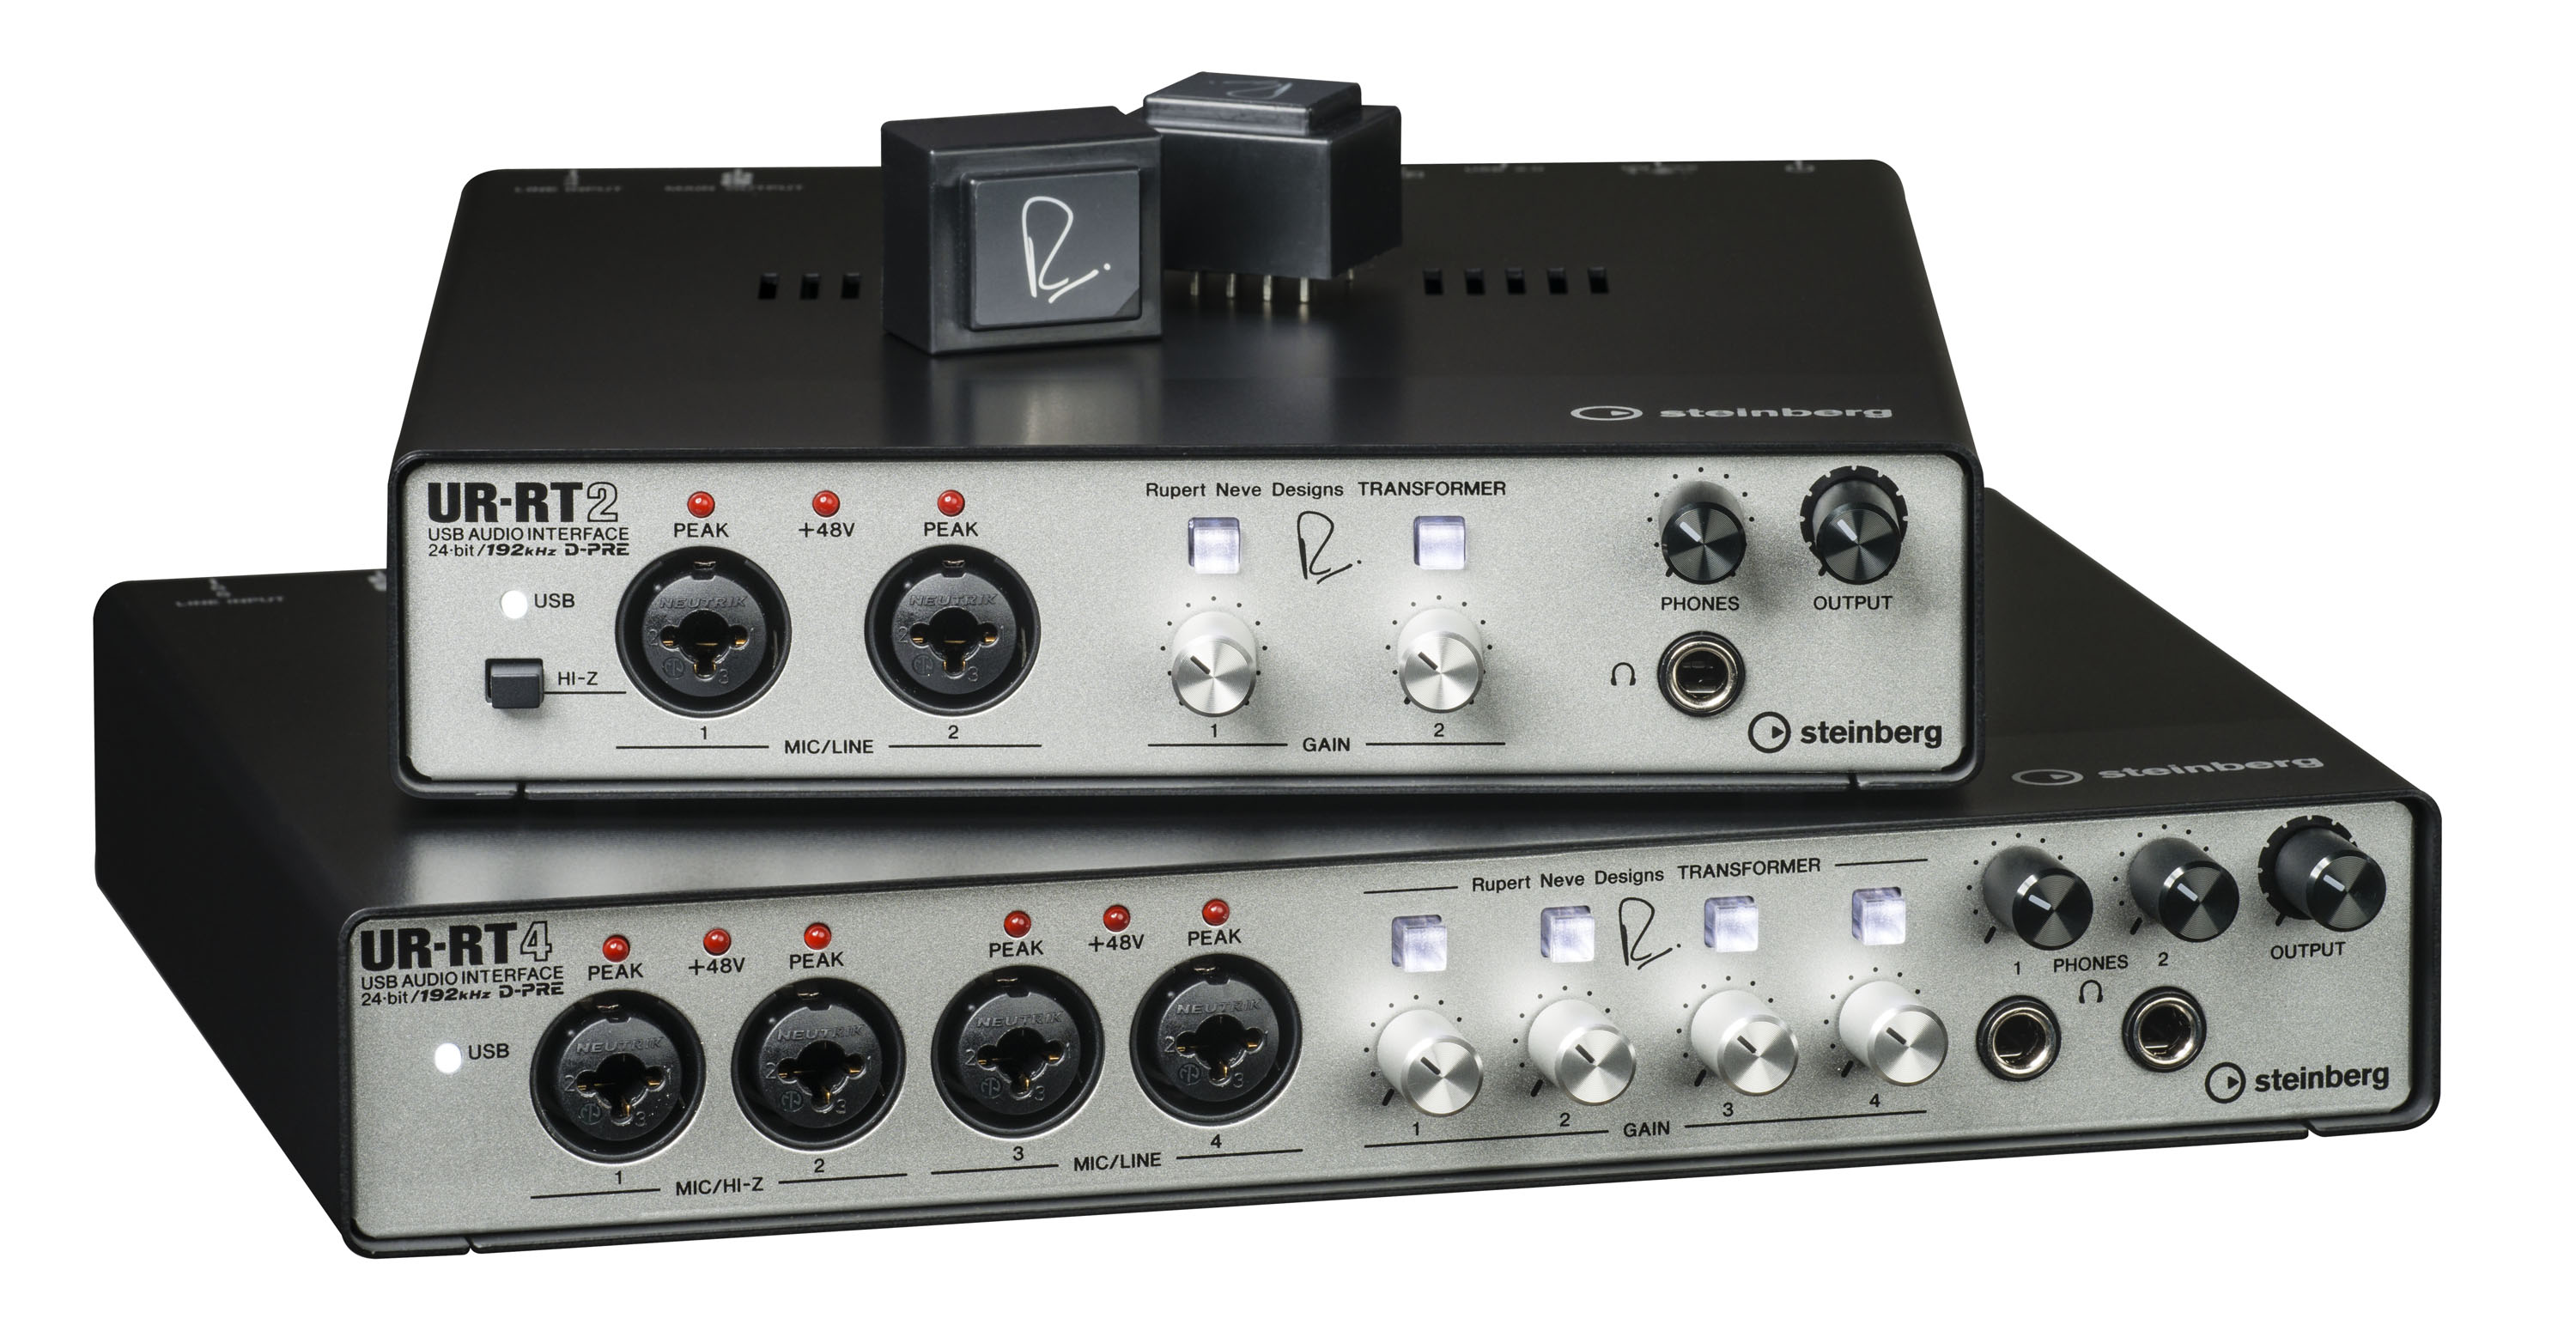 Steinberg UR-RT USB Interface with Transformers by Rupert Neve Designs